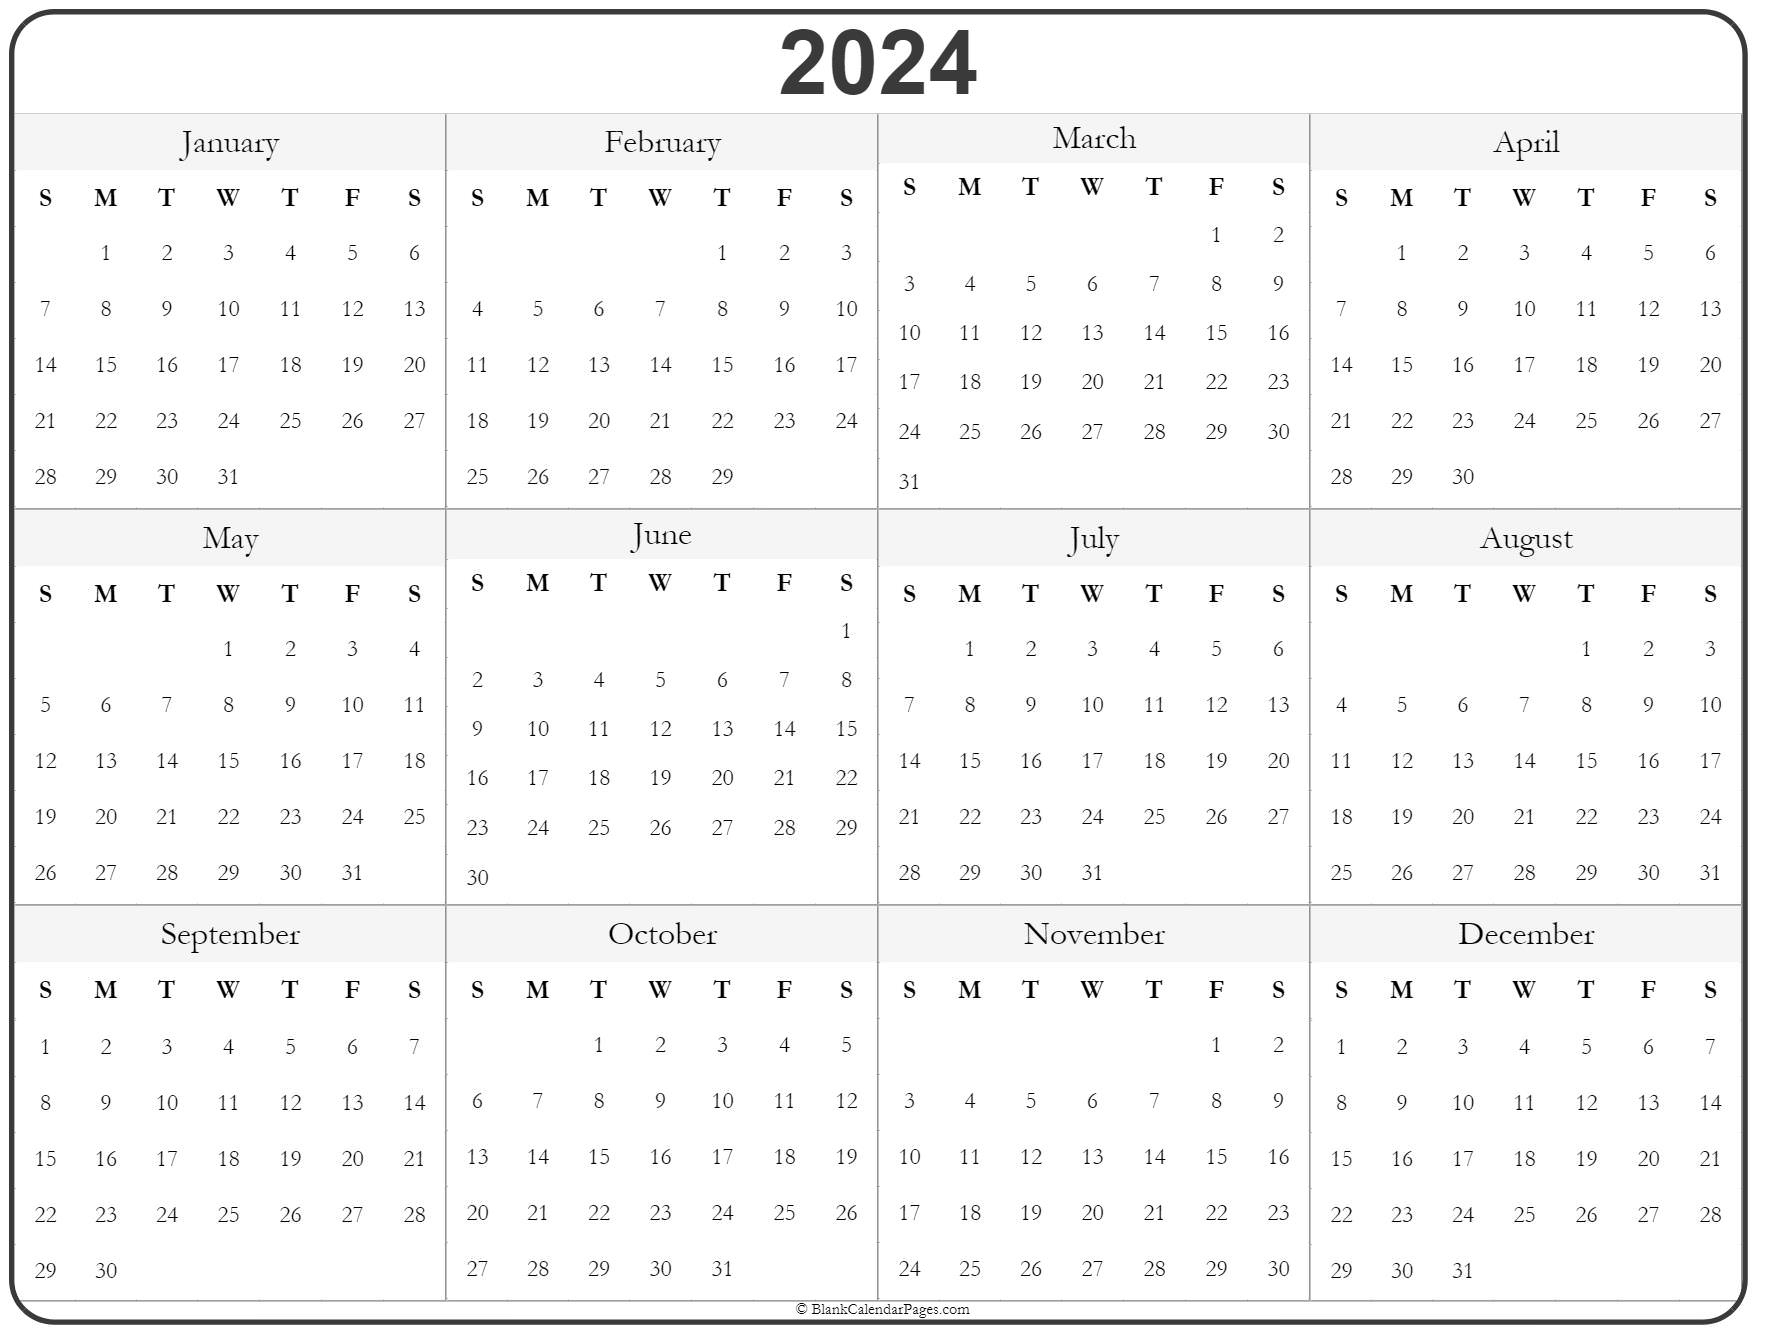 Yearly Calendar 2024 Calendar Quickly 2024 Yearly Calendar - Free Printable 2024 Yearly Calendar One Page